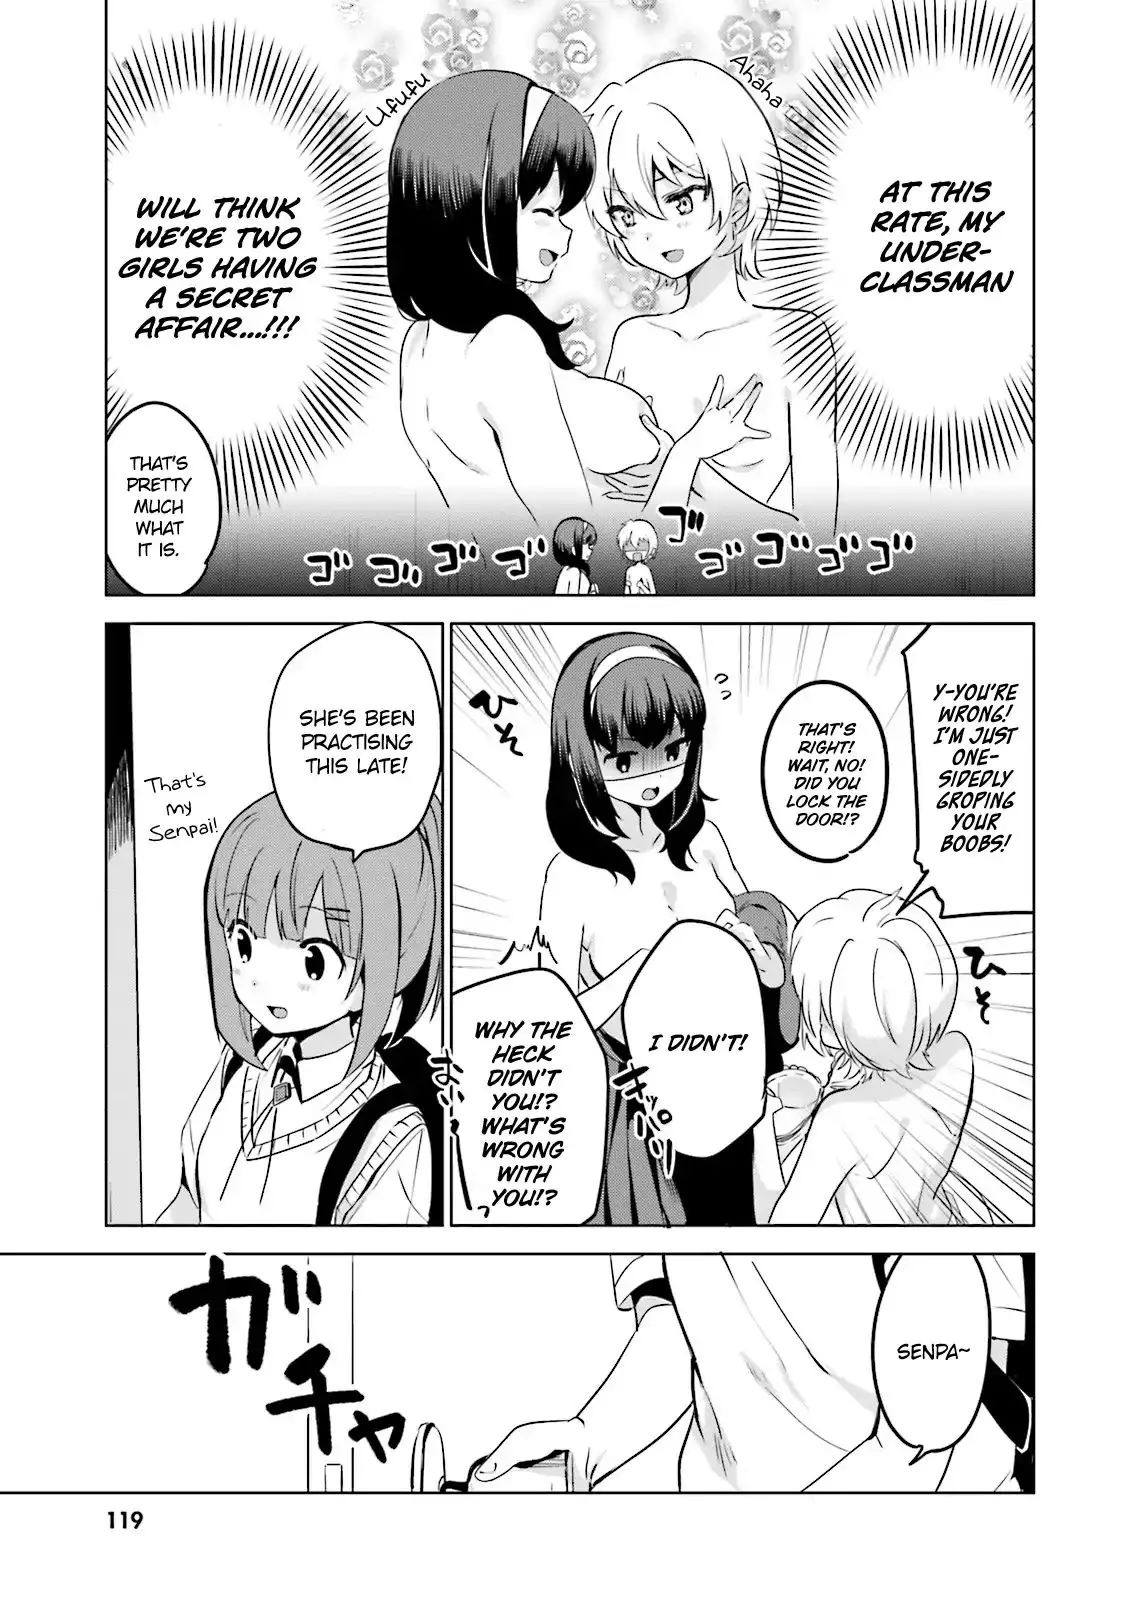 I Like Oppai Best In The World! - 9 page 7